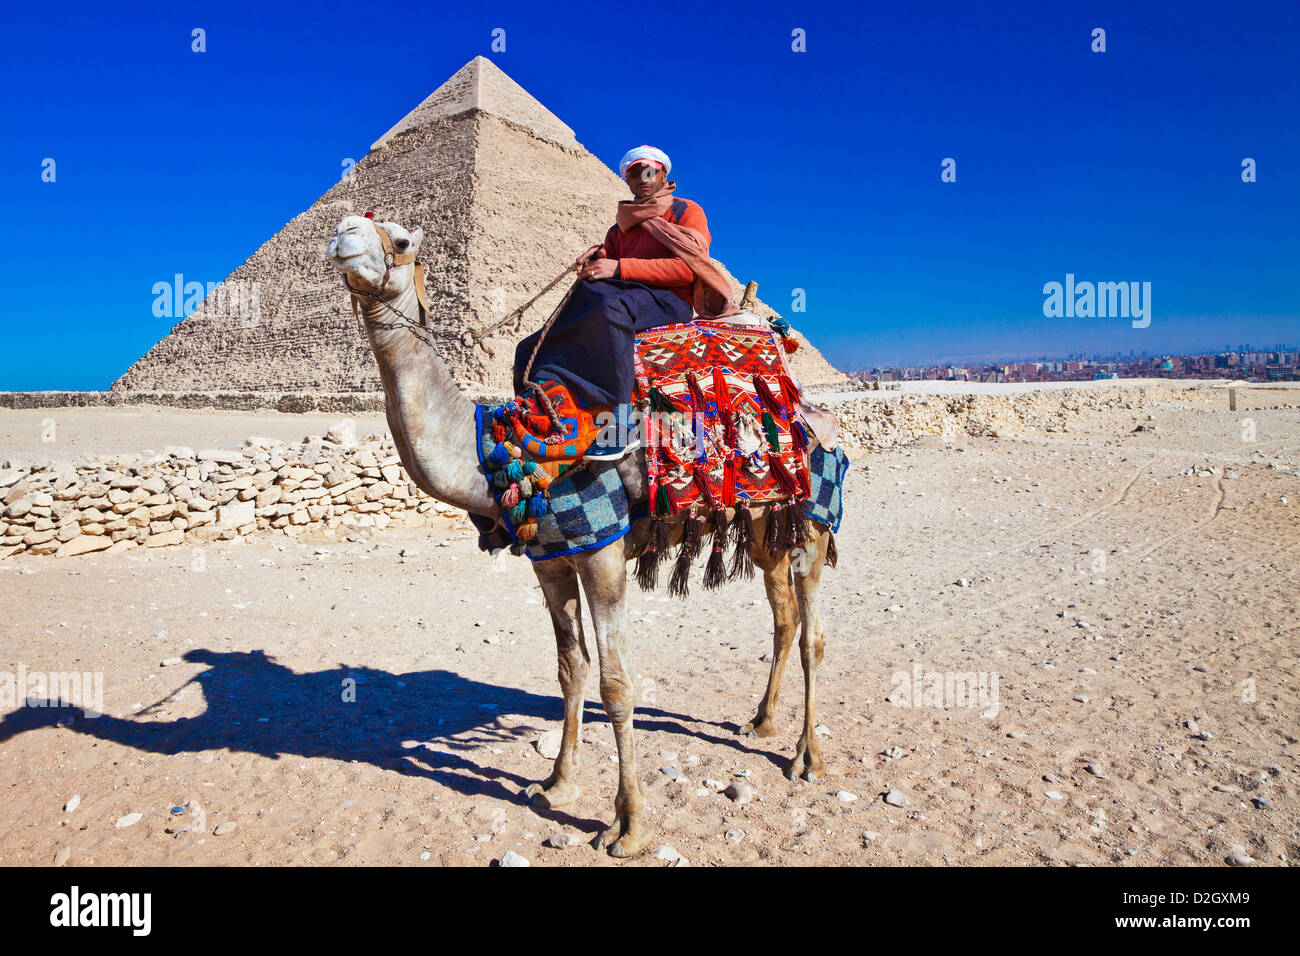 Camel driver poses in front of Pyramid of Khafre or Chefren, second-largest ancient Egyptian Pyramid of Giza near Cairo, Egypt. Stock Photo